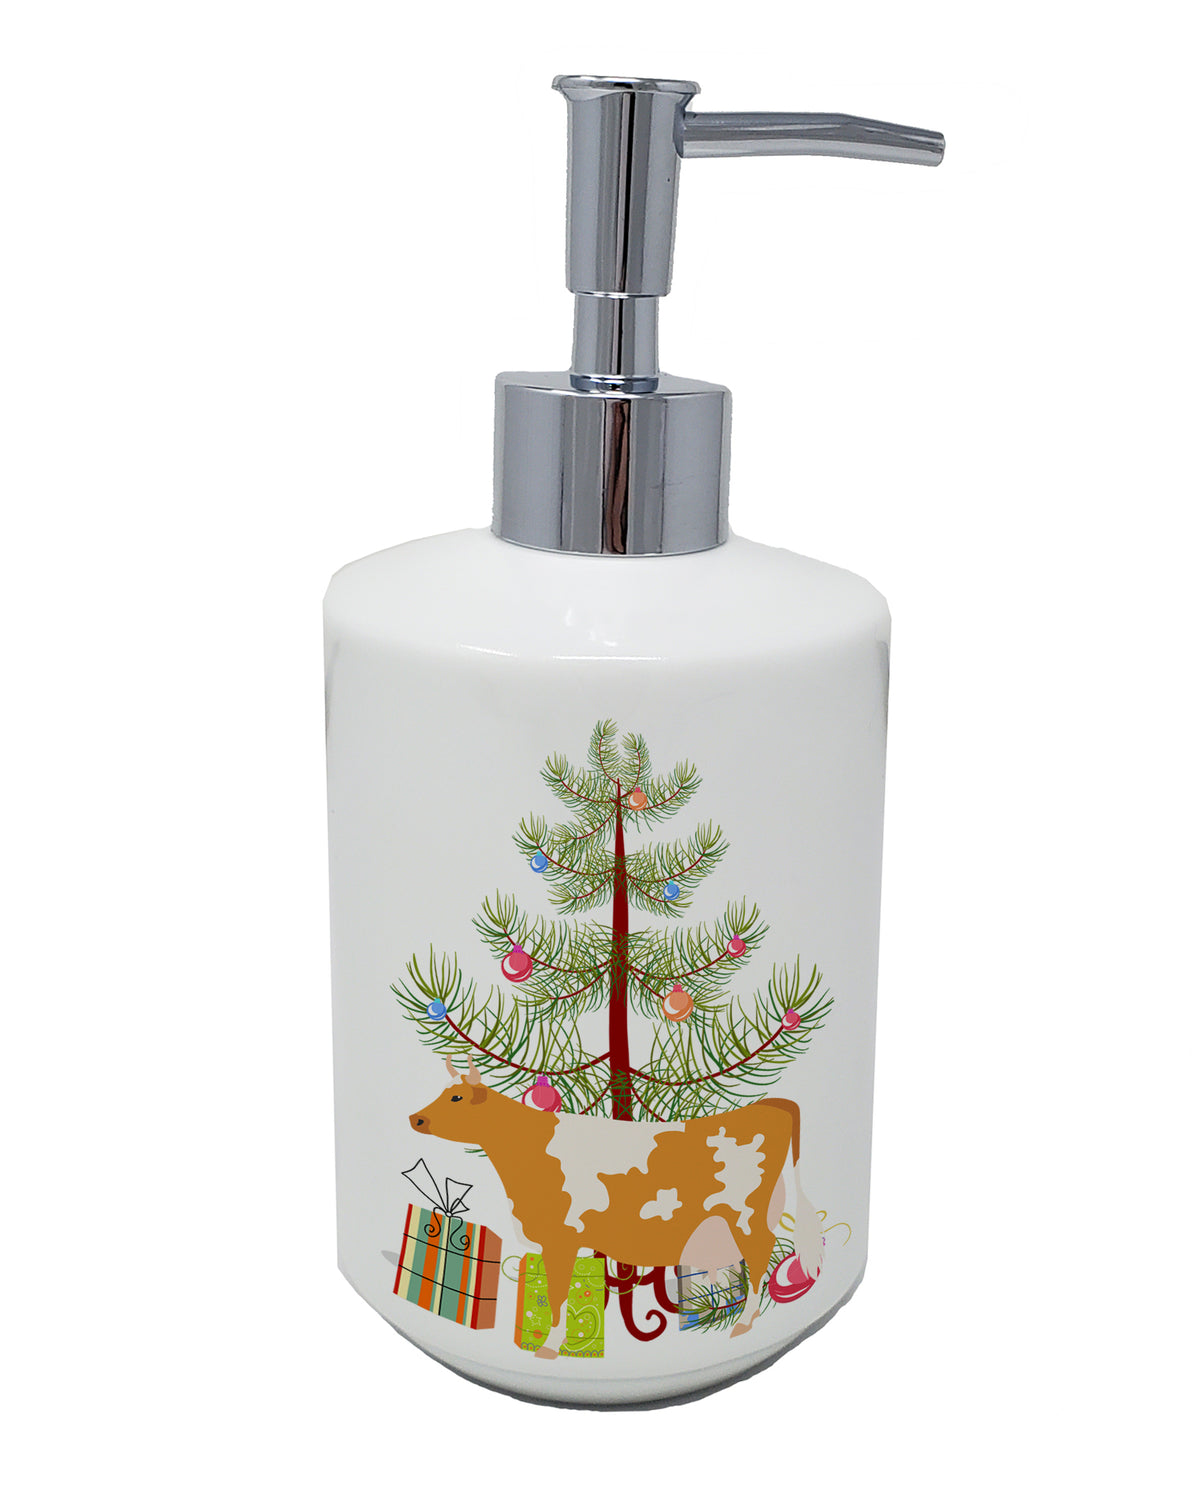 Buy this Guernsey Cow Christmas Ceramic Soap Dispenser